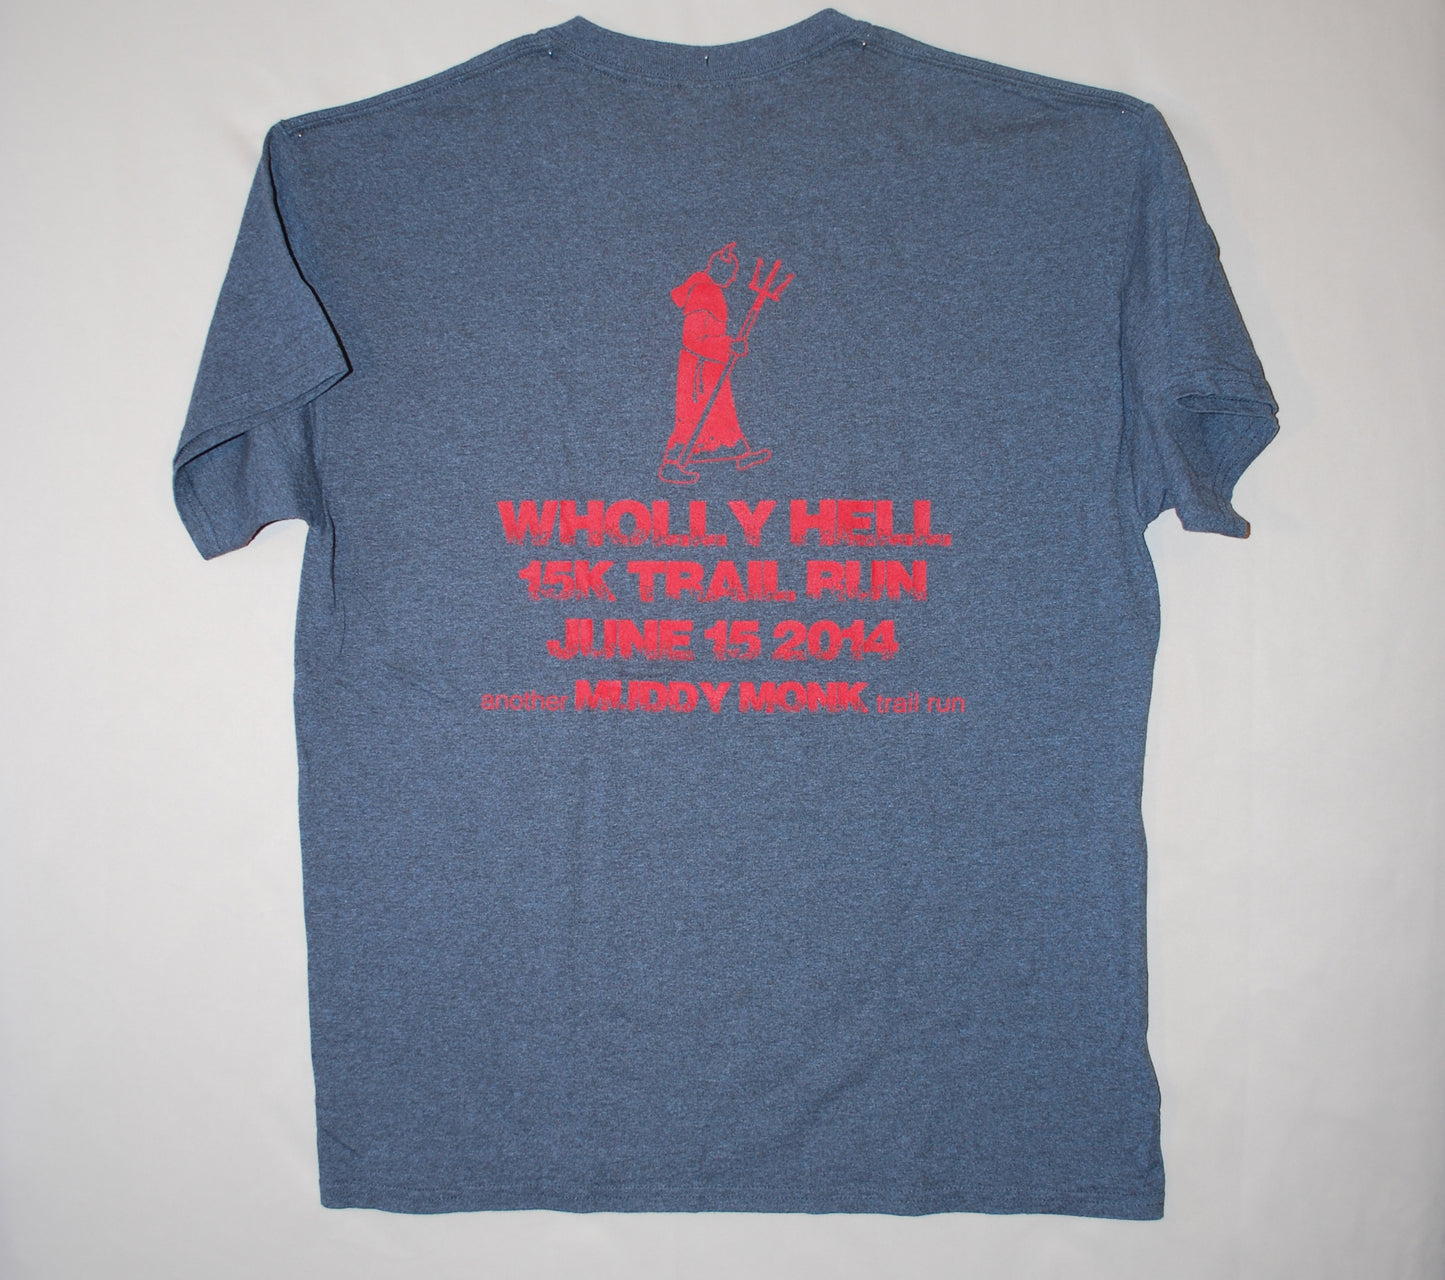 Muddy Monk • Wholly Hell 15K Trail Run • June 15, 2014 • Double Sided • Gray • L • Preowned